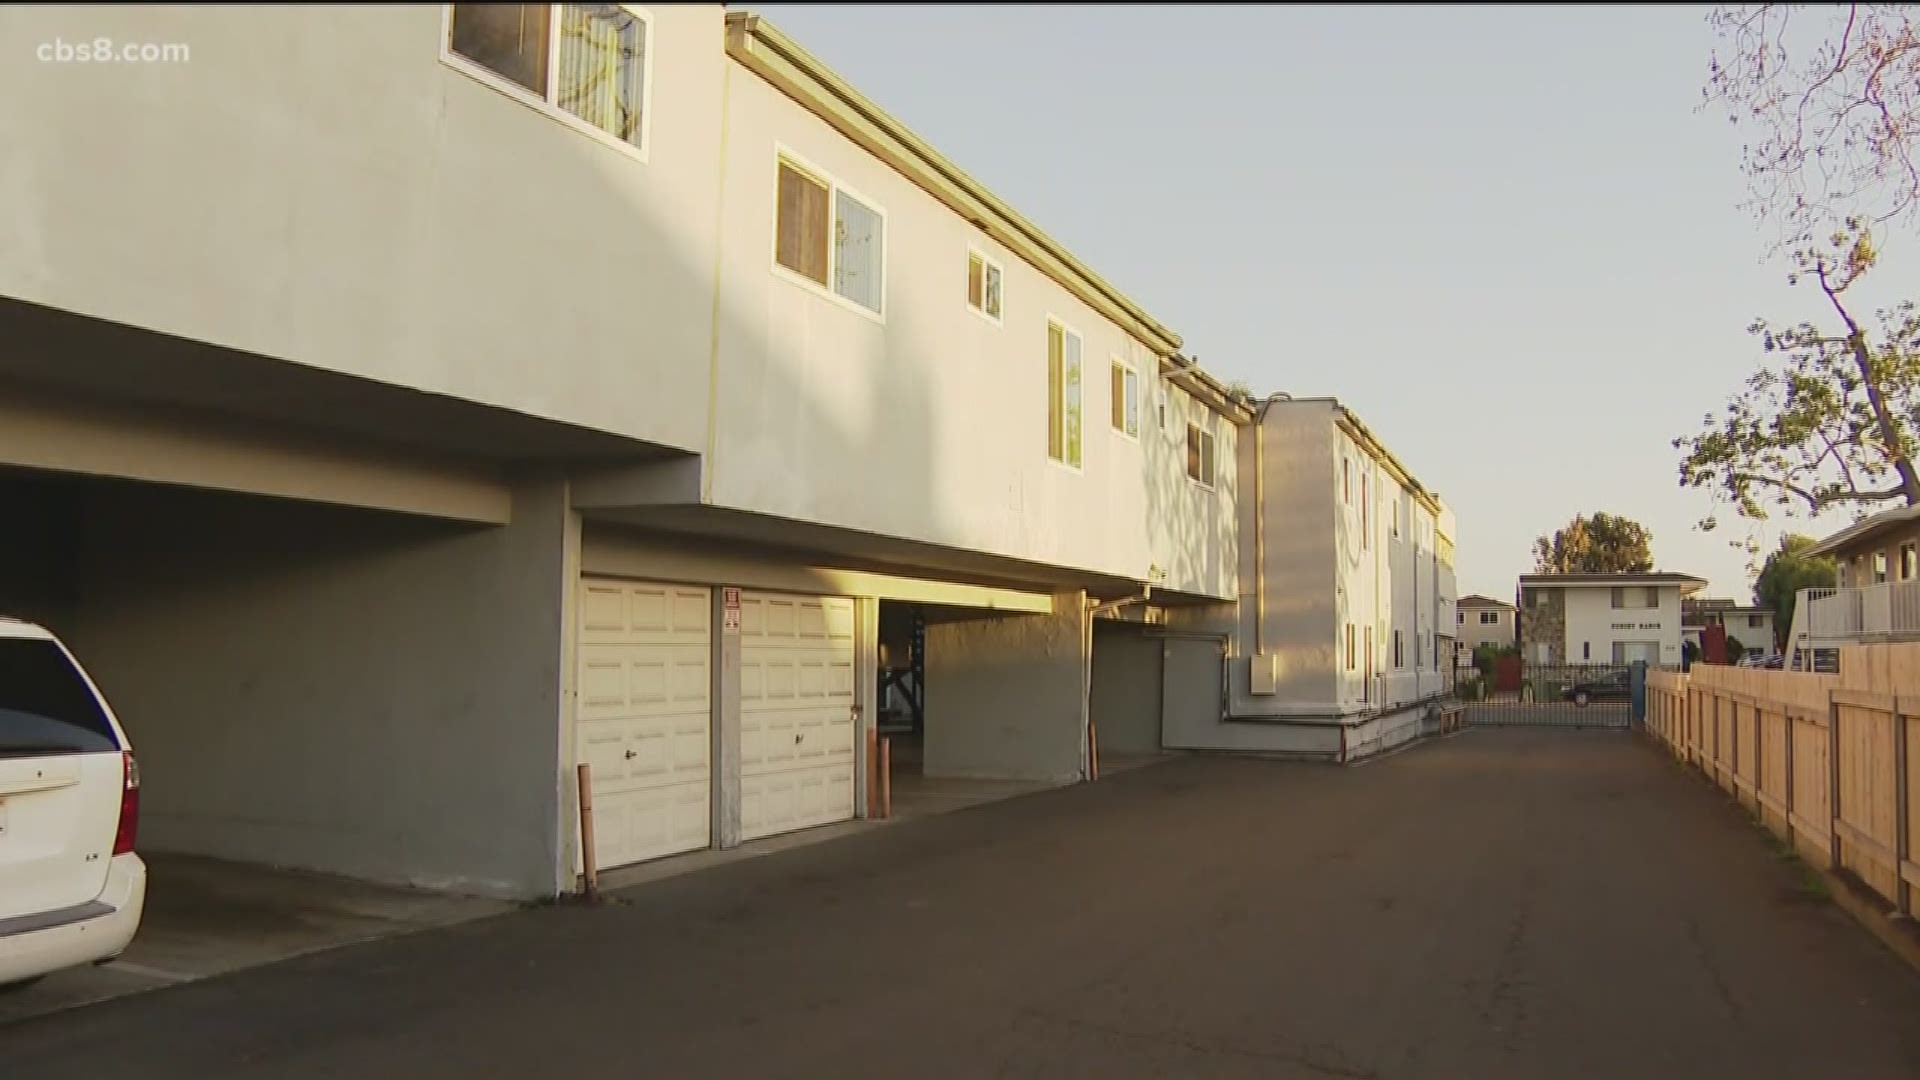 Tenants at Meheli Palms Apartments located at 215 H Street in Chula Vista said they have been given a week to pack up and move.